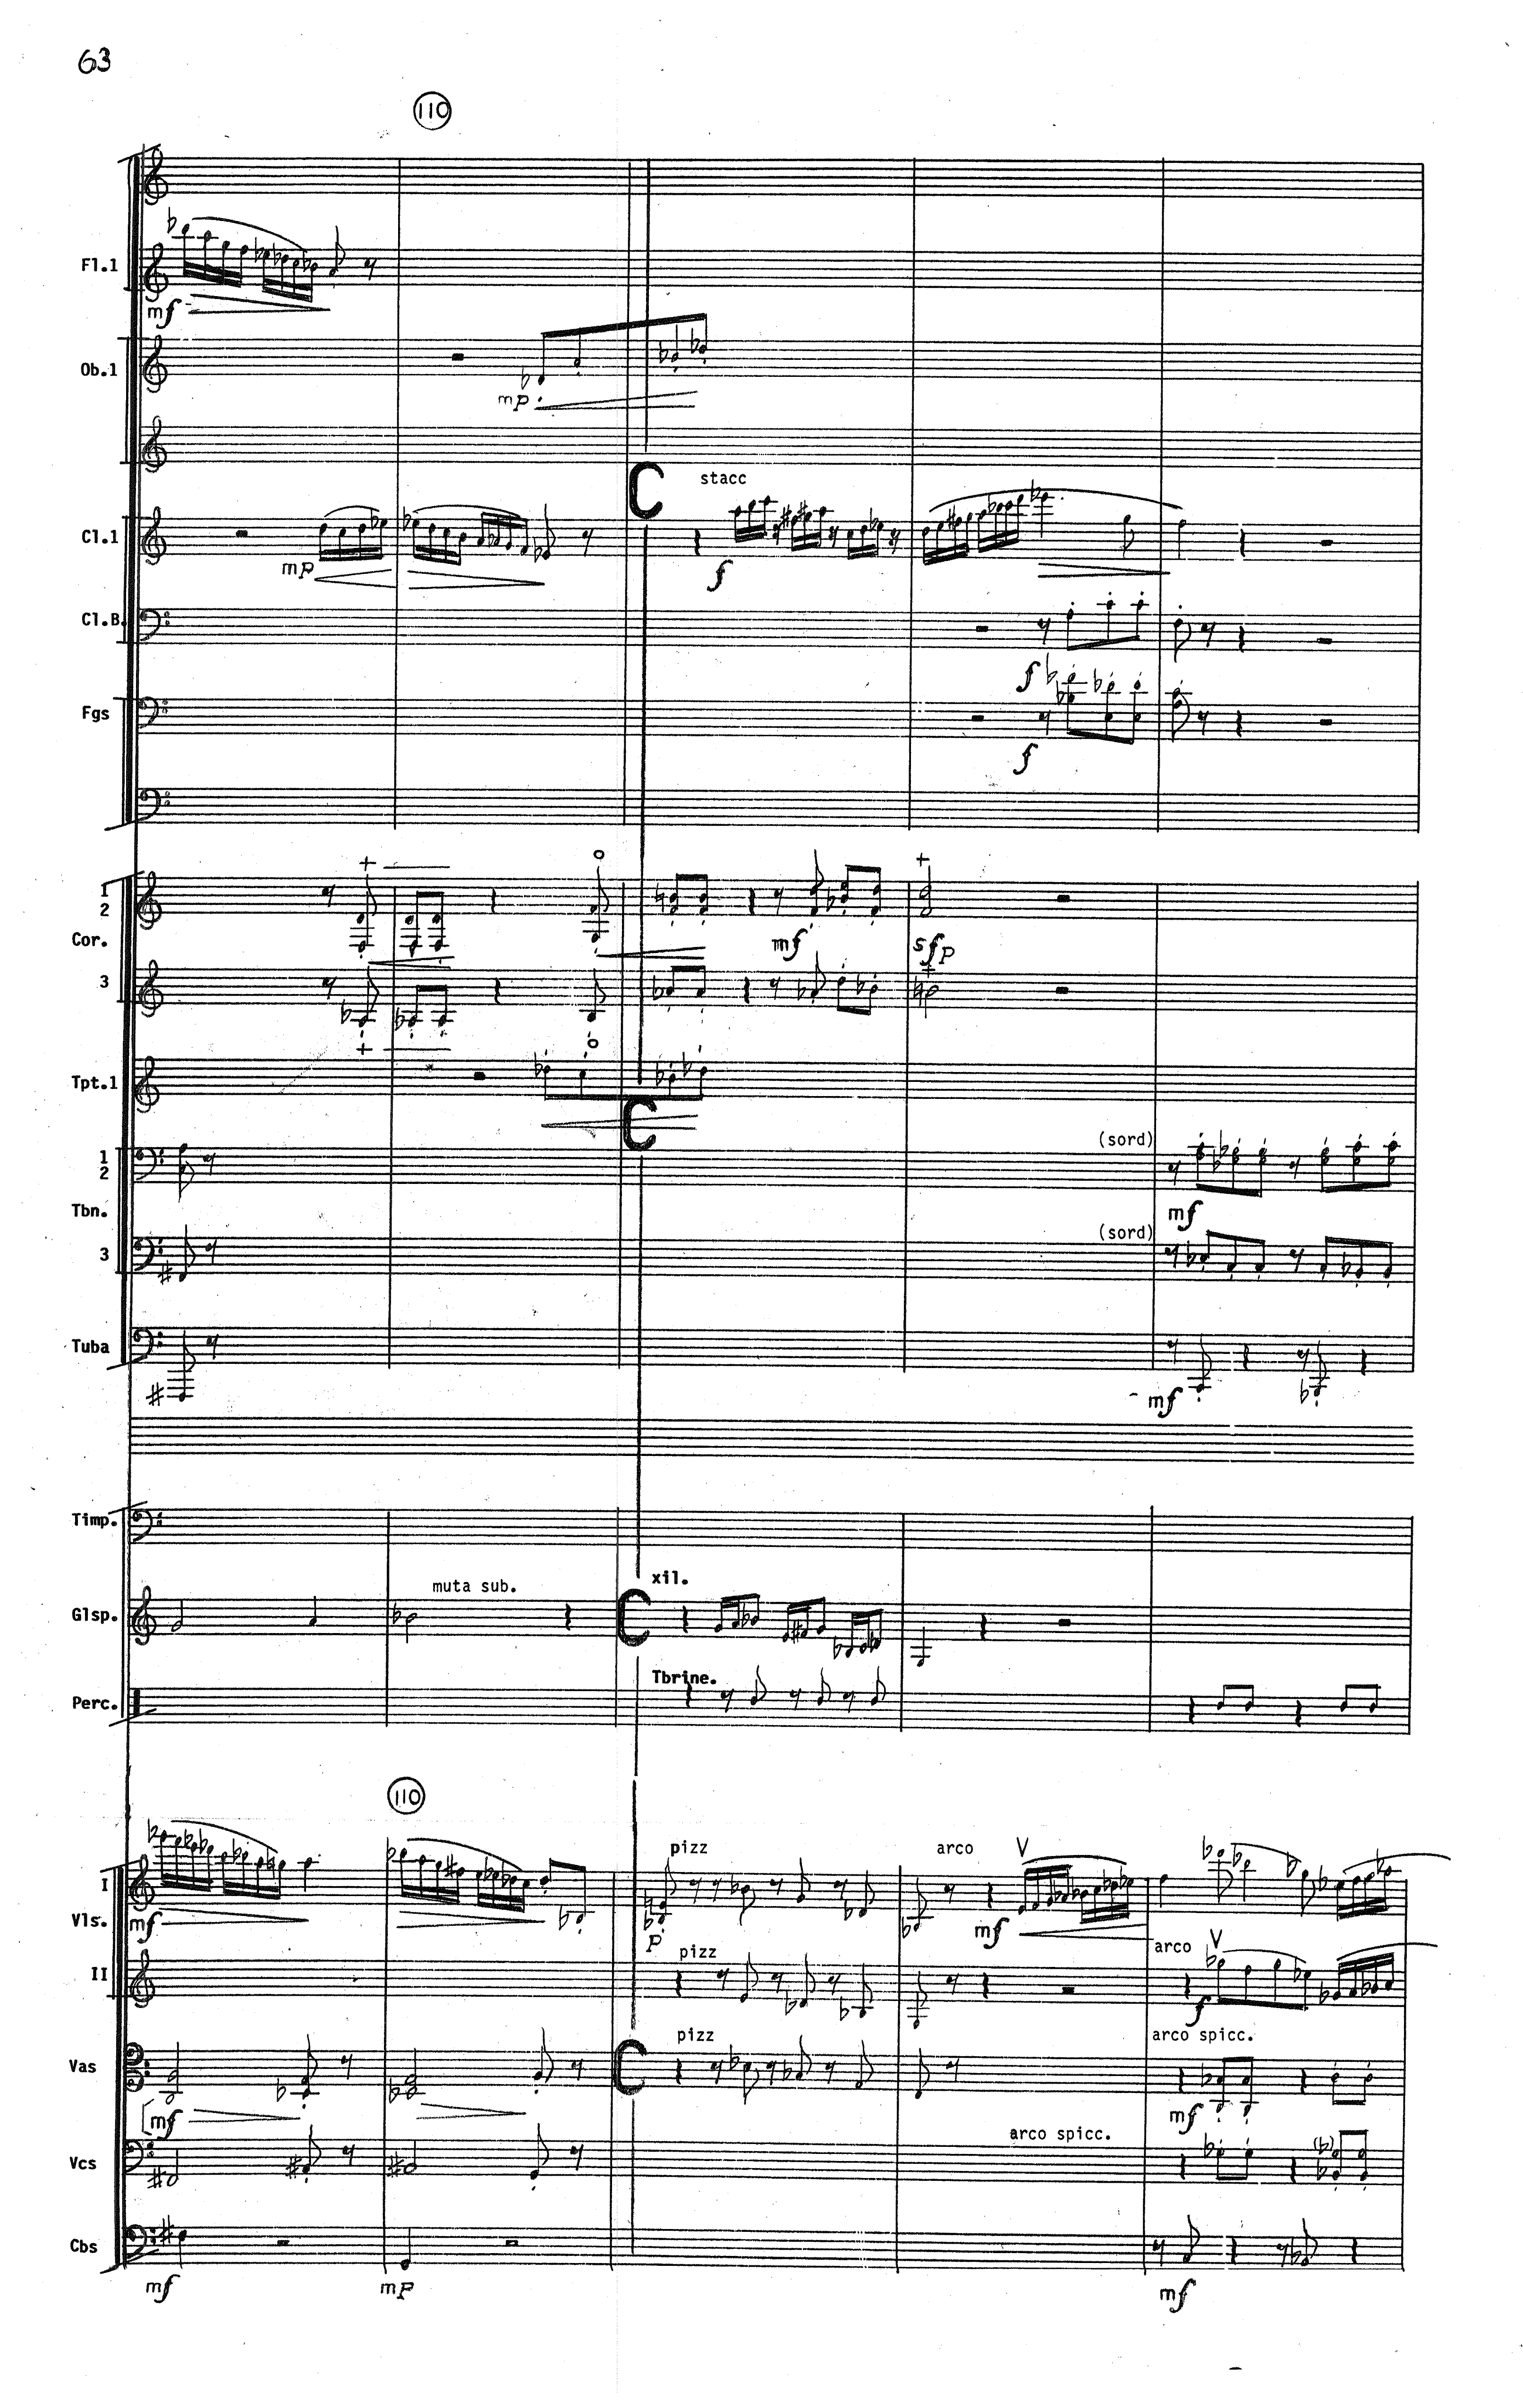 Excerpt from the score of Orrego-Salas' 5th Symphony